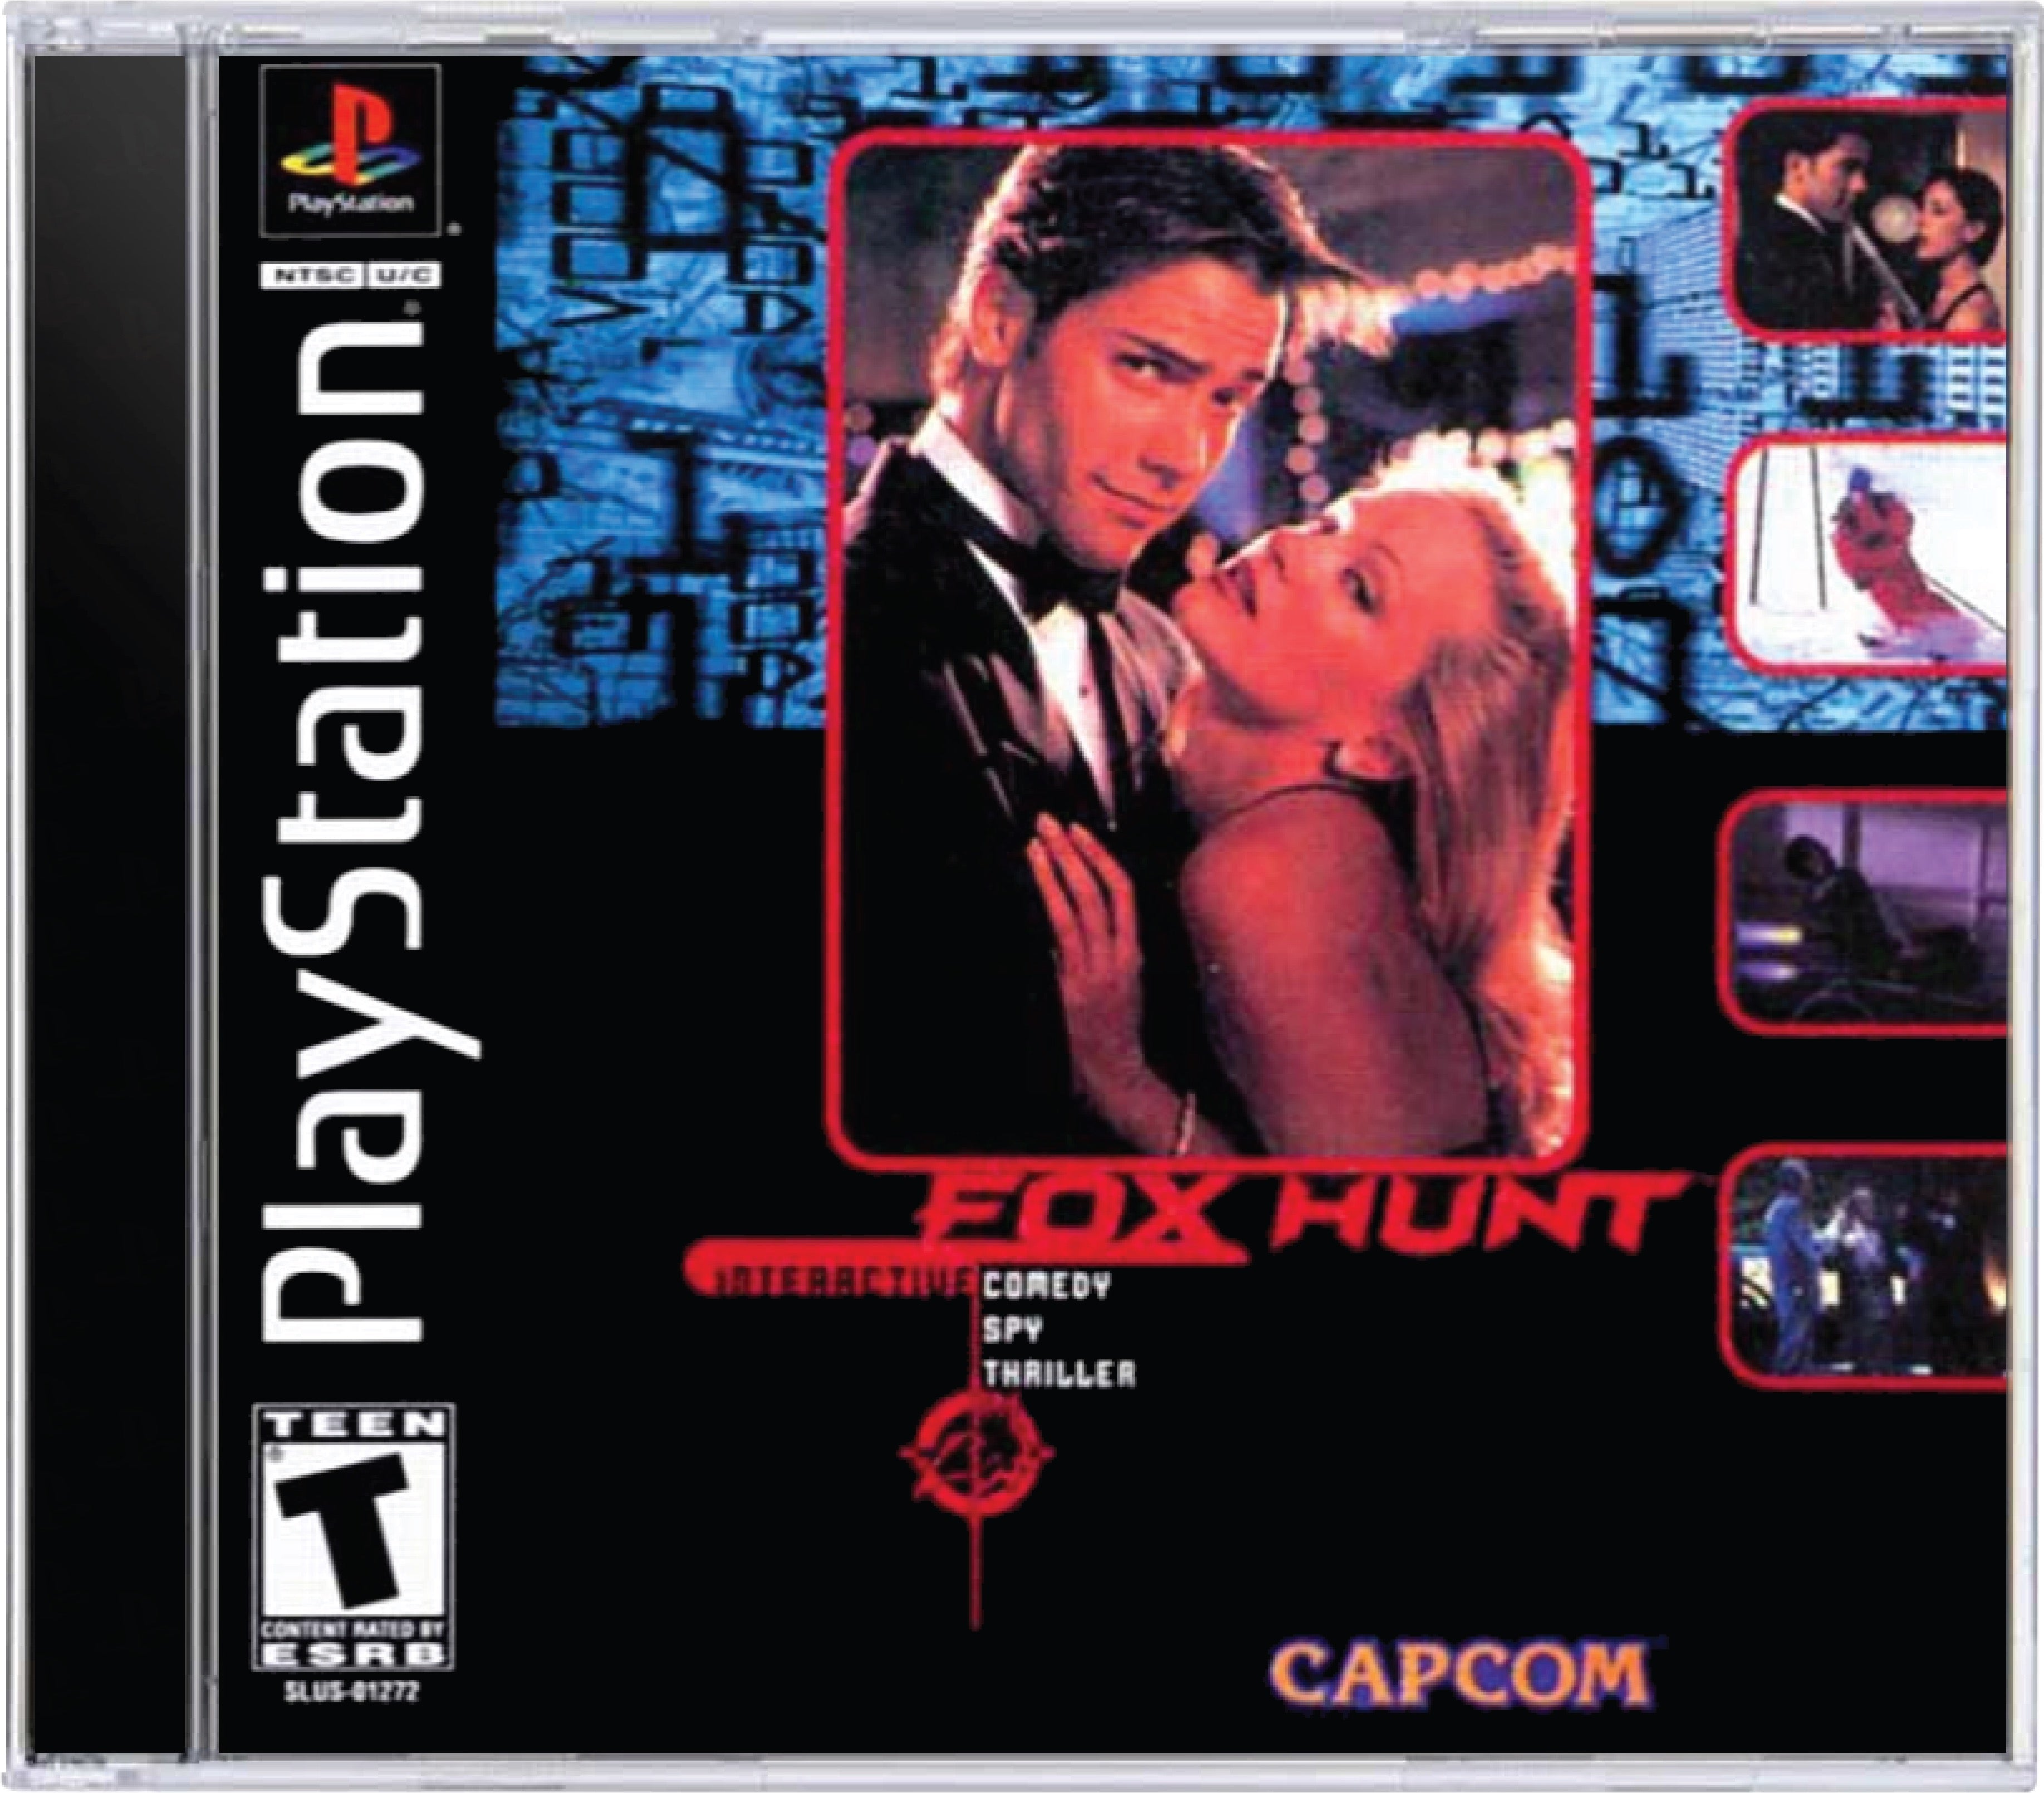 Fox Hunt Cover Art and Product Photo